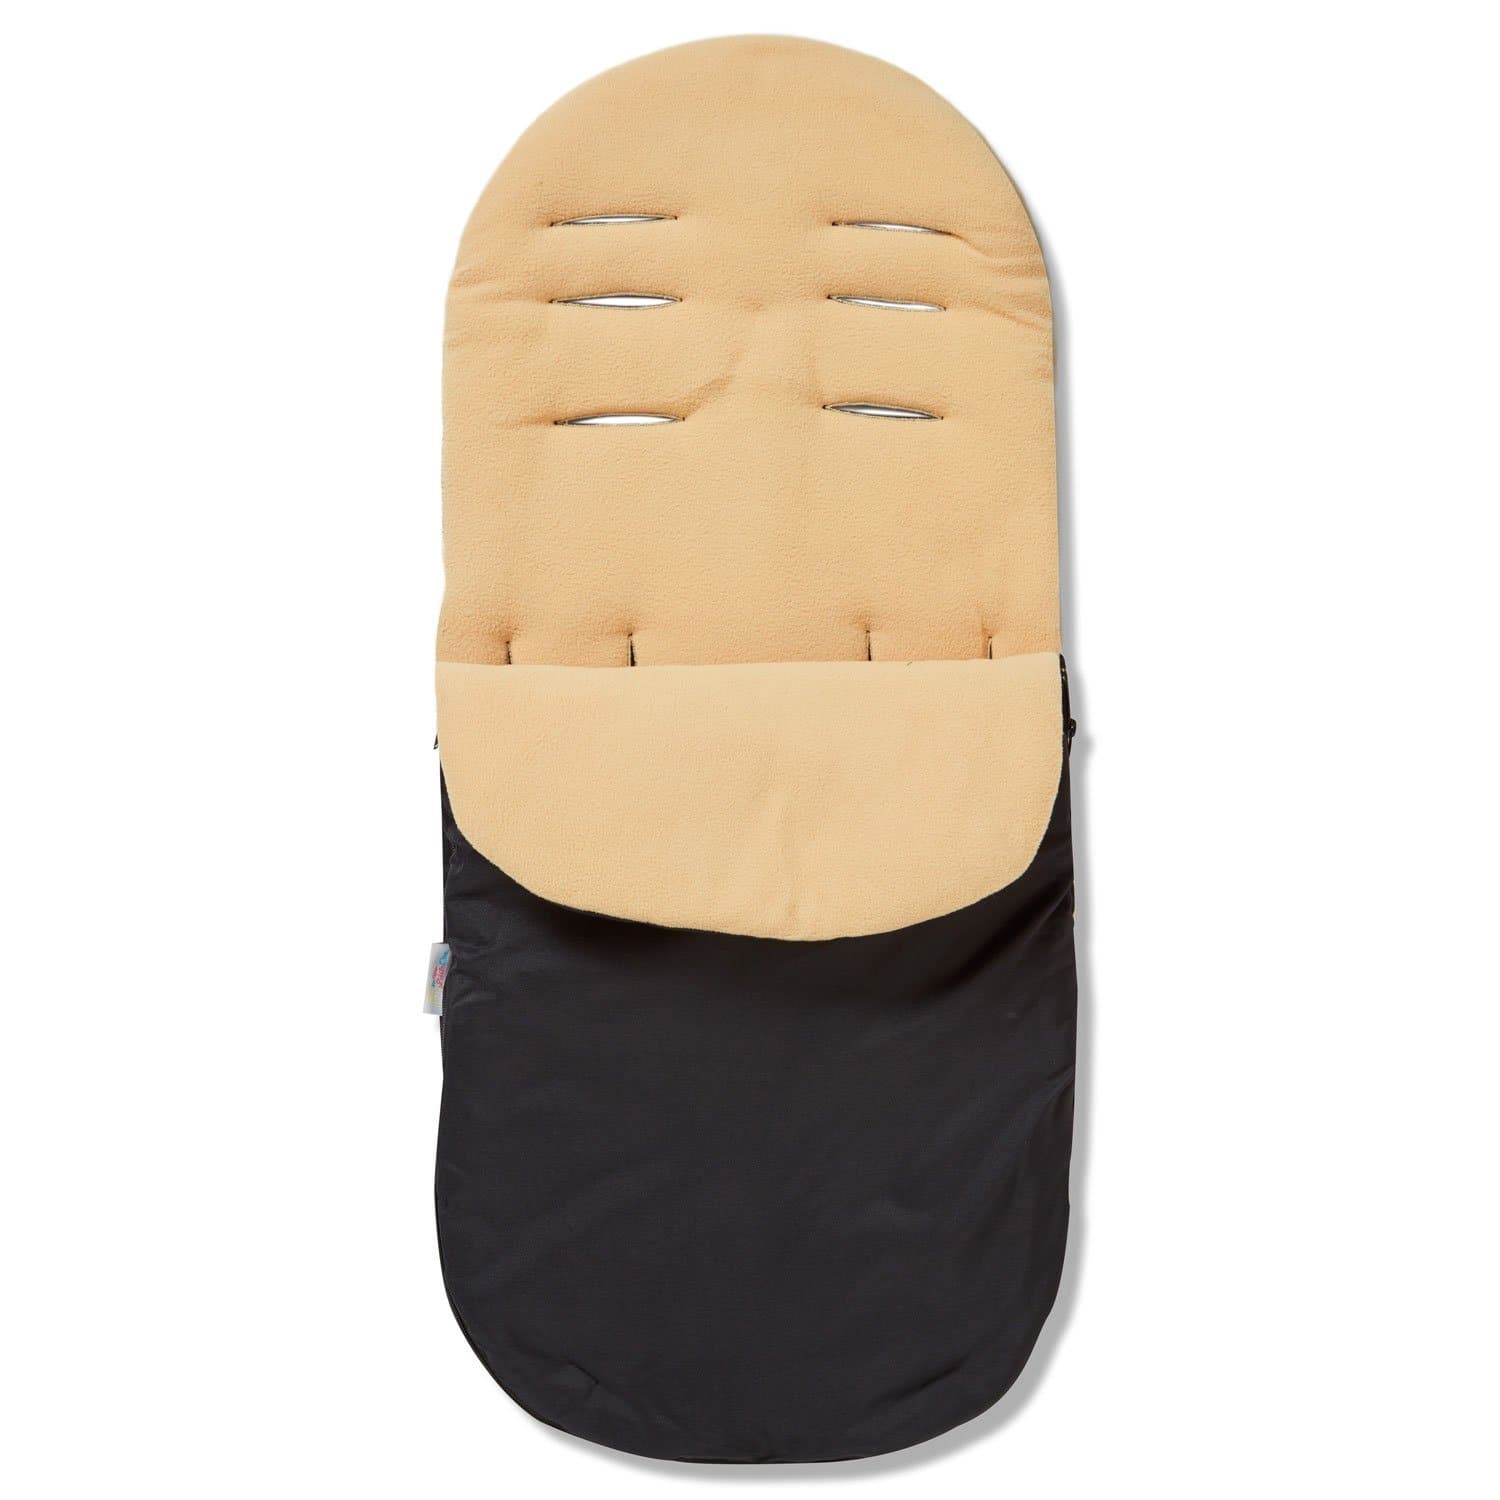 Footmuff / Cosy Toes Compatible with Combi - Sand / Fits All Models | For Your Little One